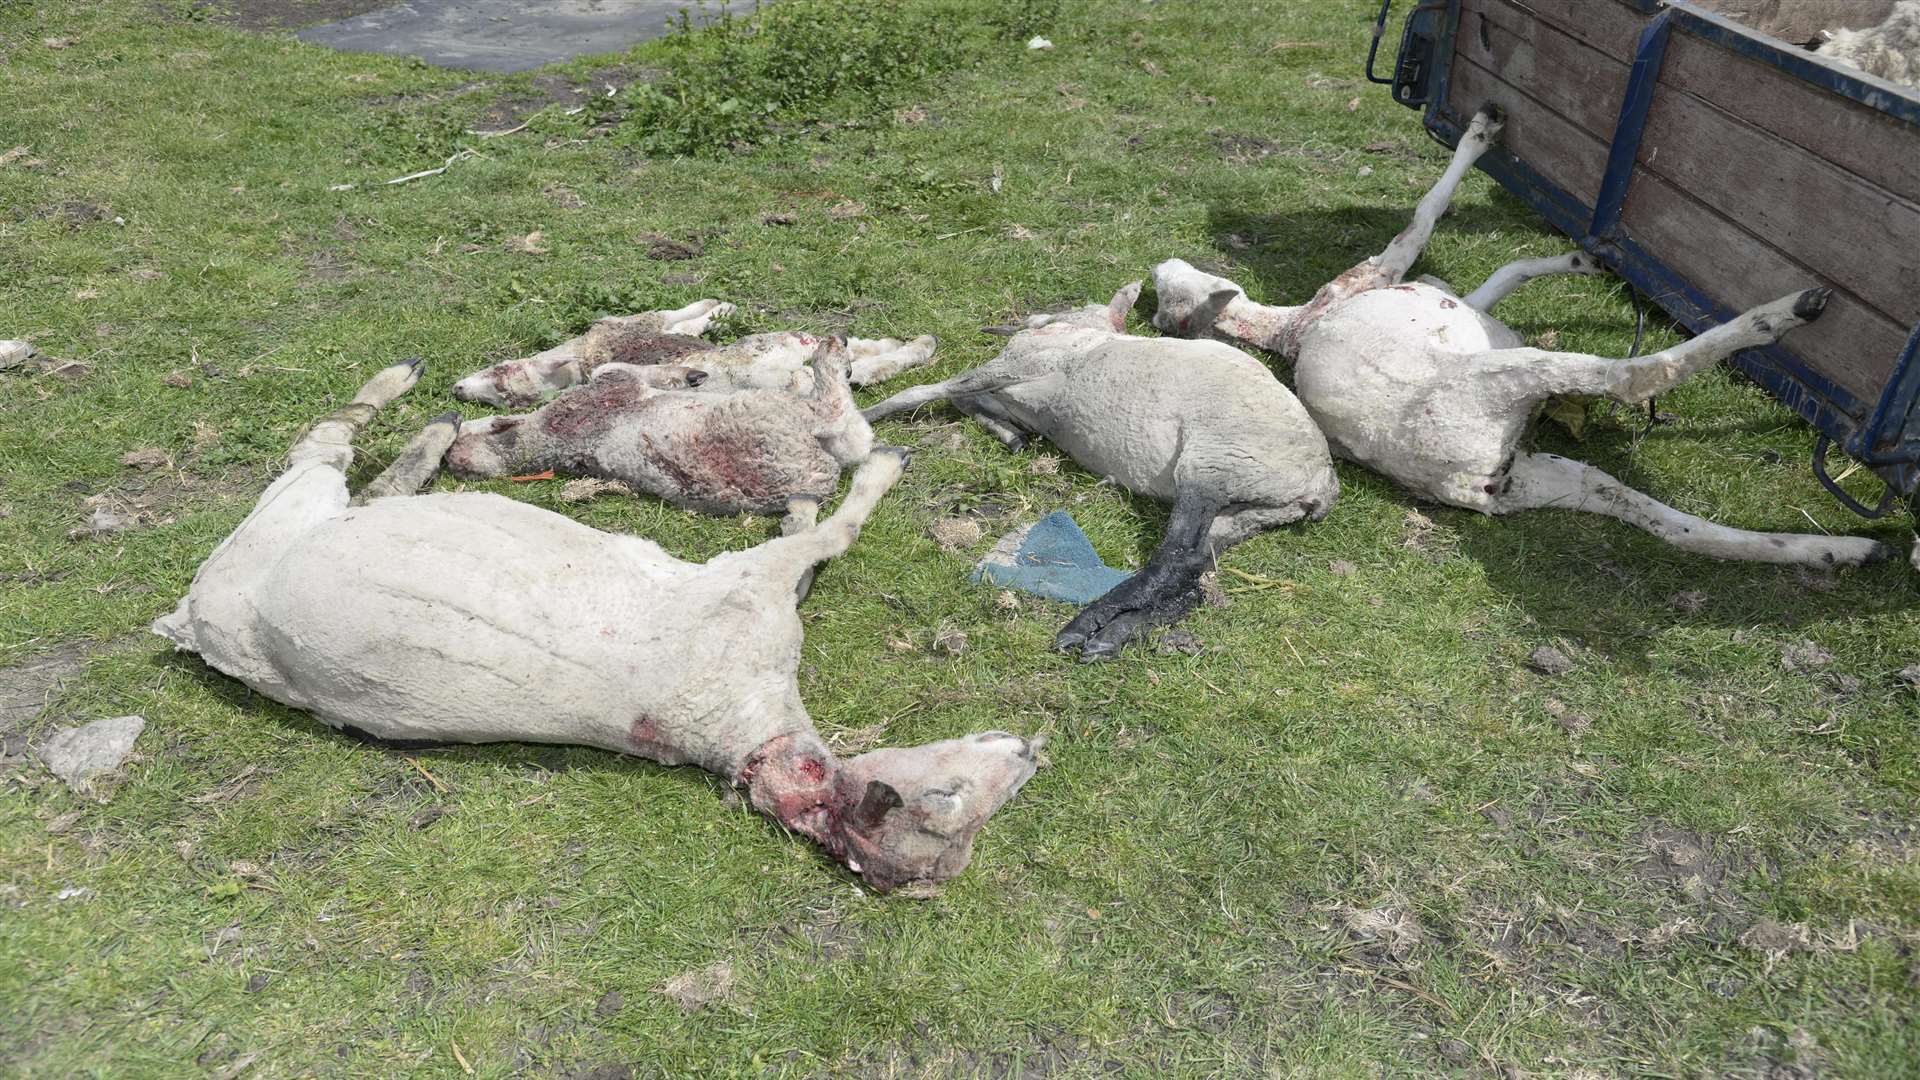 Some of the dead sheep found after being mauled by dogs at Danley Marshes Farm at Halfway